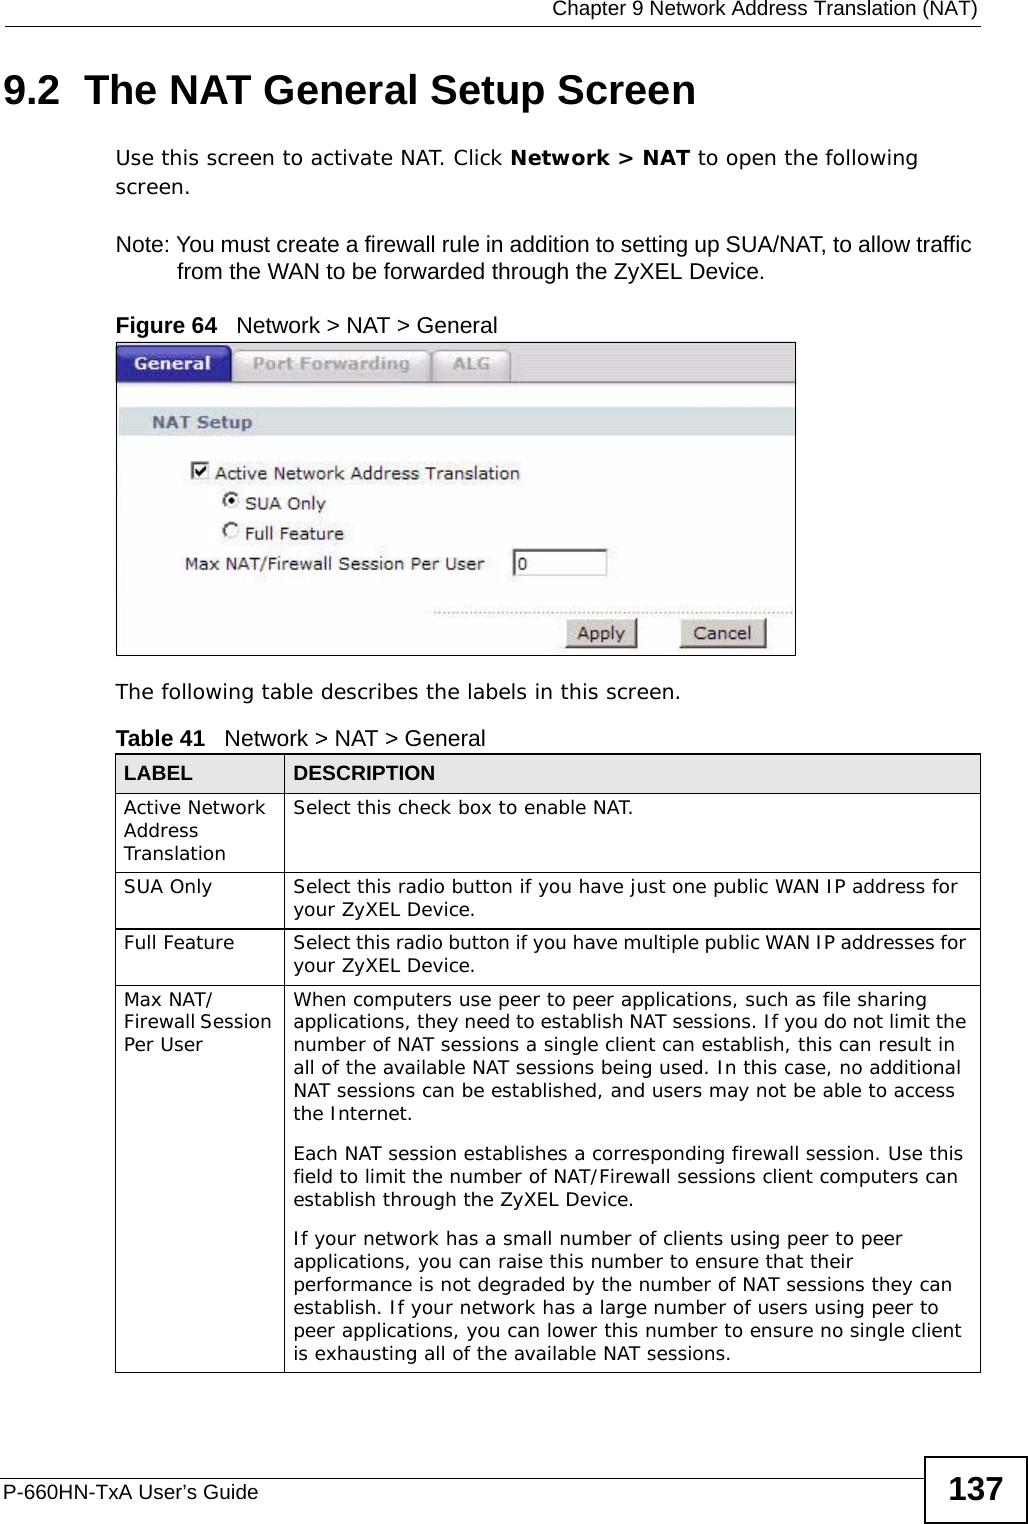  Chapter 9 Network Address Translation (NAT)P-660HN-TxA User’s Guide 1379.2  The NAT General Setup ScreenUse this screen to activate NAT. Click Network &gt; NAT to open the following screen.Note: You must create a firewall rule in addition to setting up SUA/NAT, to allow traffic from the WAN to be forwarded through the ZyXEL Device.Figure 64   Network &gt; NAT &gt; GeneralThe following table describes the labels in this screen.Table 41   Network &gt; NAT &gt; GeneralLABEL DESCRIPTIONActive Network Address Translation Select this check box to enable NAT.SUA Only Select this radio button if you have just one public WAN IP address for your ZyXEL Device.Full Feature  Select this radio button if you have multiple public WAN IP addresses for your ZyXEL Device.Max NAT/Firewall Session Per UserWhen computers use peer to peer applications, such as file sharing applications, they need to establish NAT sessions. If you do not limit the number of NAT sessions a single client can establish, this can result in all of the available NAT sessions being used. In this case, no additional NAT sessions can be established, and users may not be able to access the Internet.Each NAT session establishes a corresponding firewall session. Use this field to limit the number of NAT/Firewall sessions client computers can establish through the ZyXEL Device.If your network has a small number of clients using peer to peer applications, you can raise this number to ensure that their performance is not degraded by the number of NAT sessions they can establish. If your network has a large number of users using peer to peer applications, you can lower this number to ensure no single client is exhausting all of the available NAT sessions.